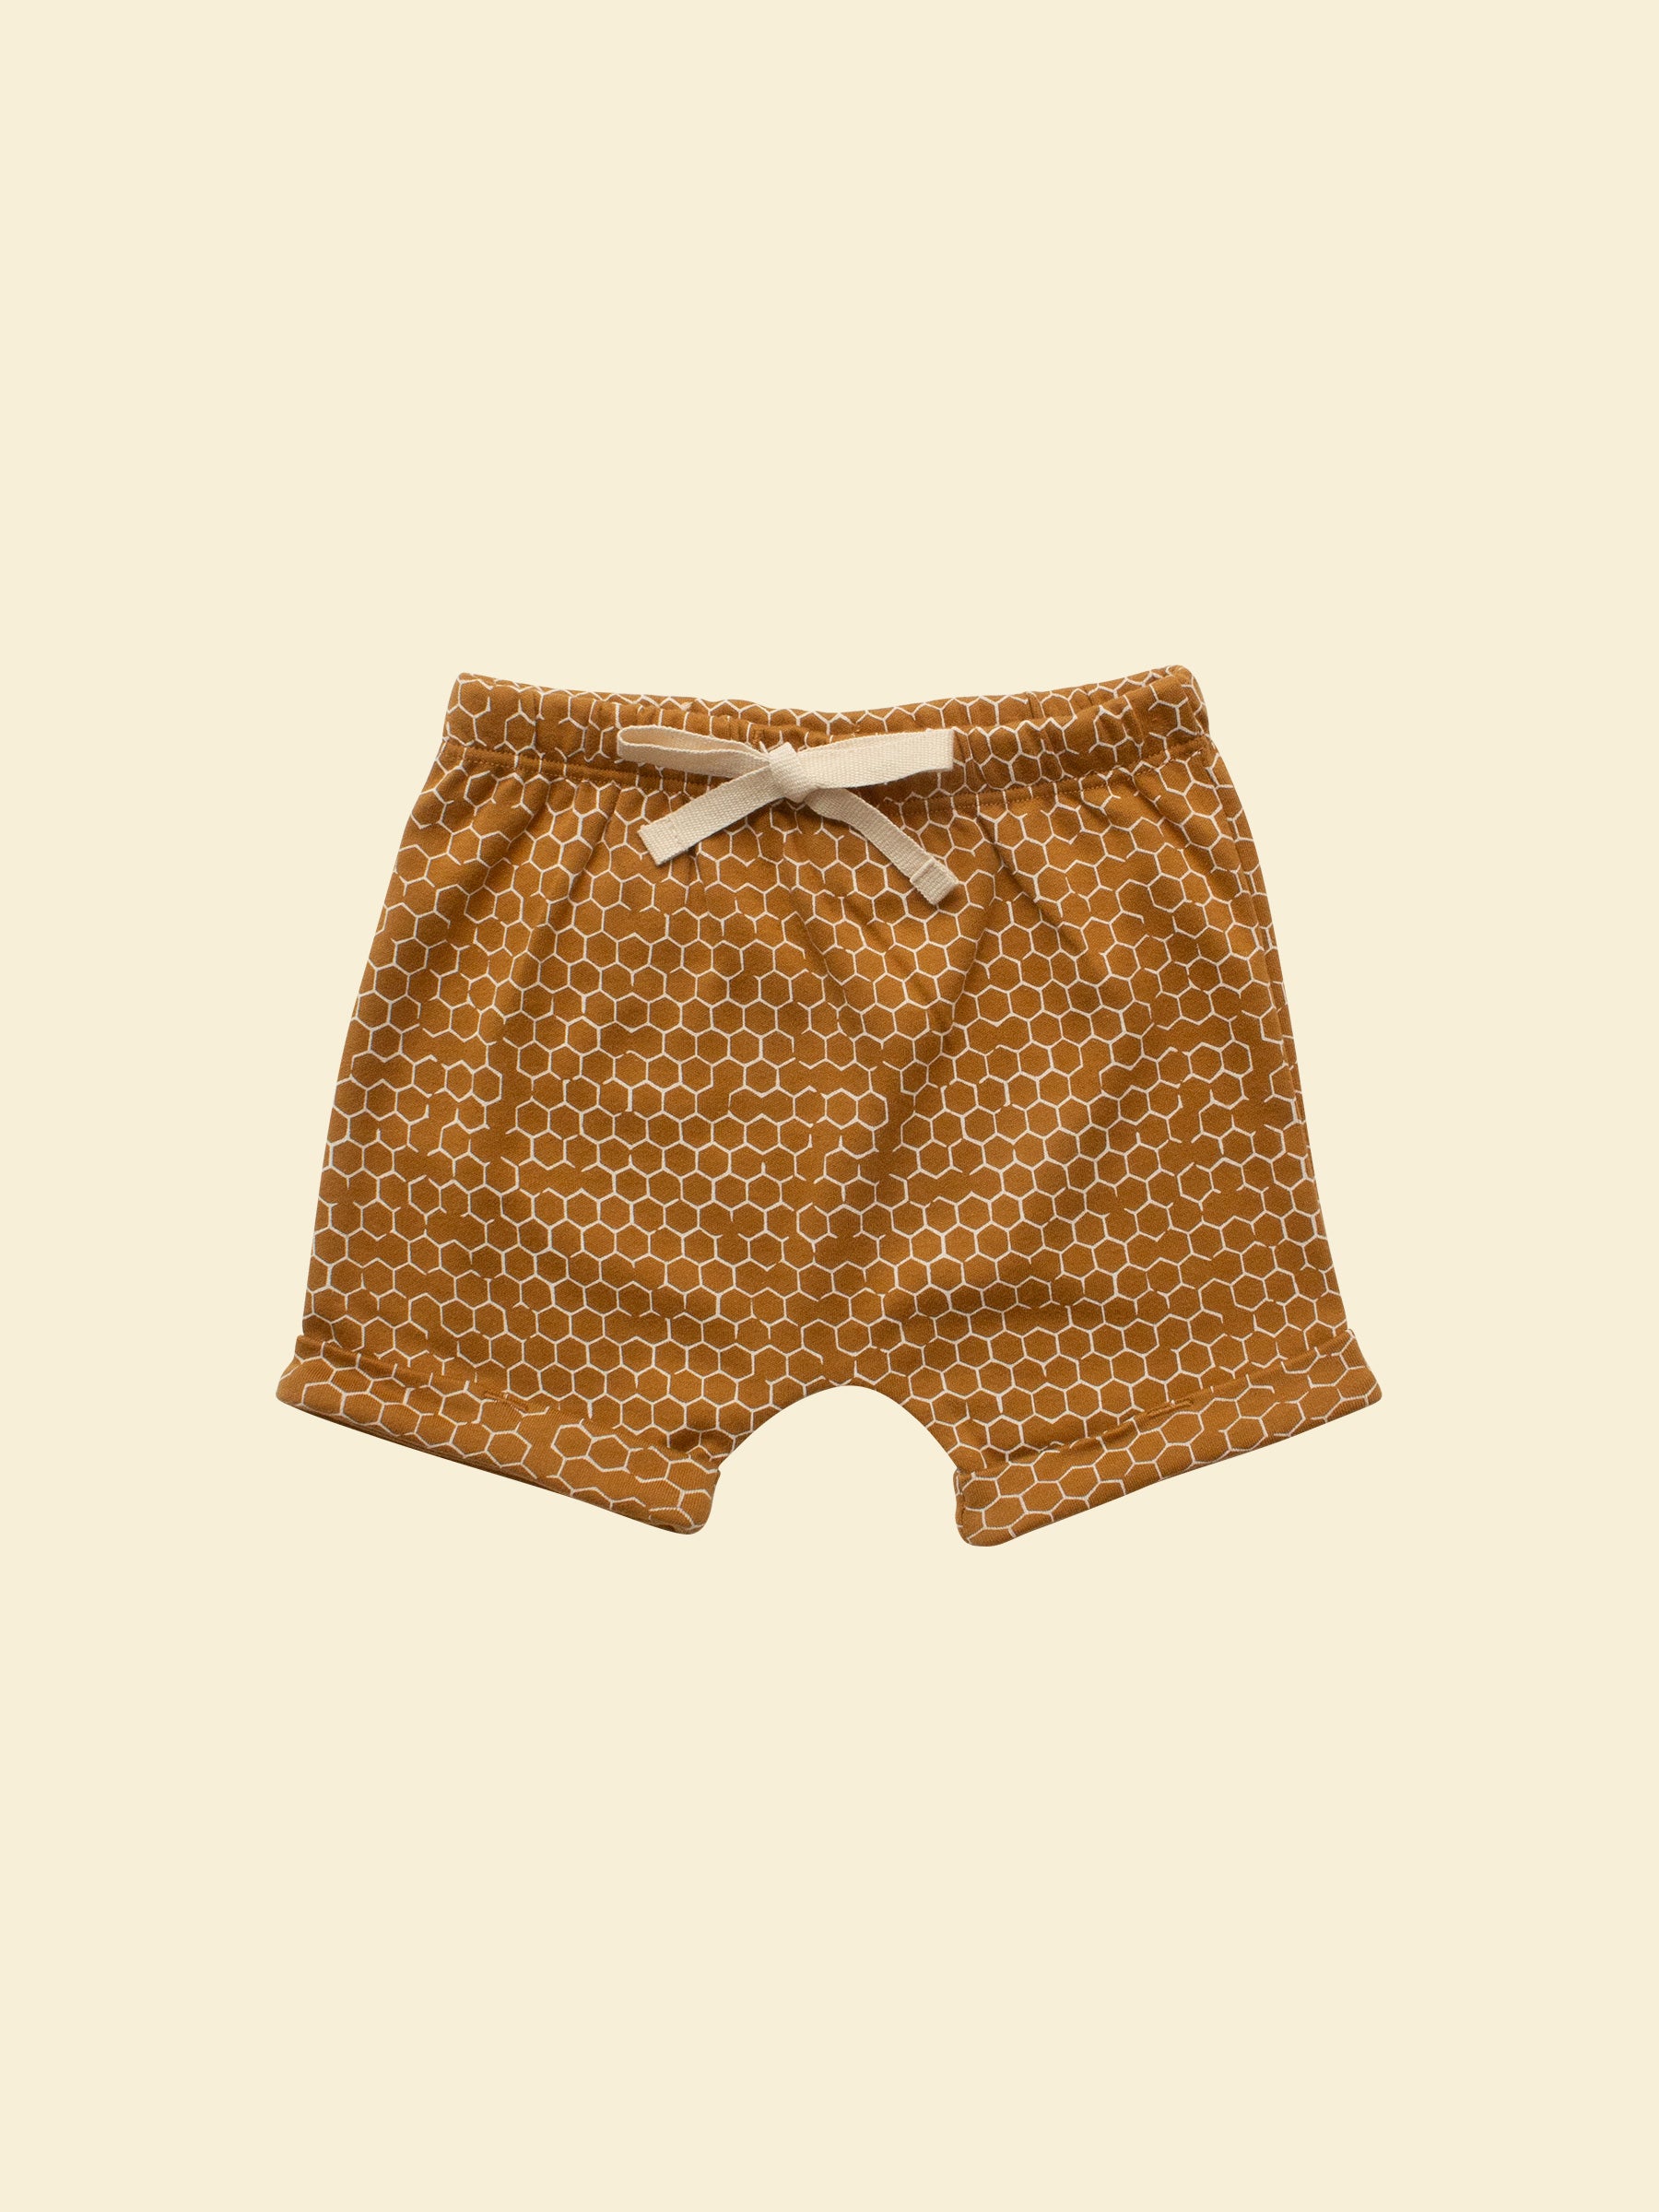 Shorts in Honeycomb (Front)